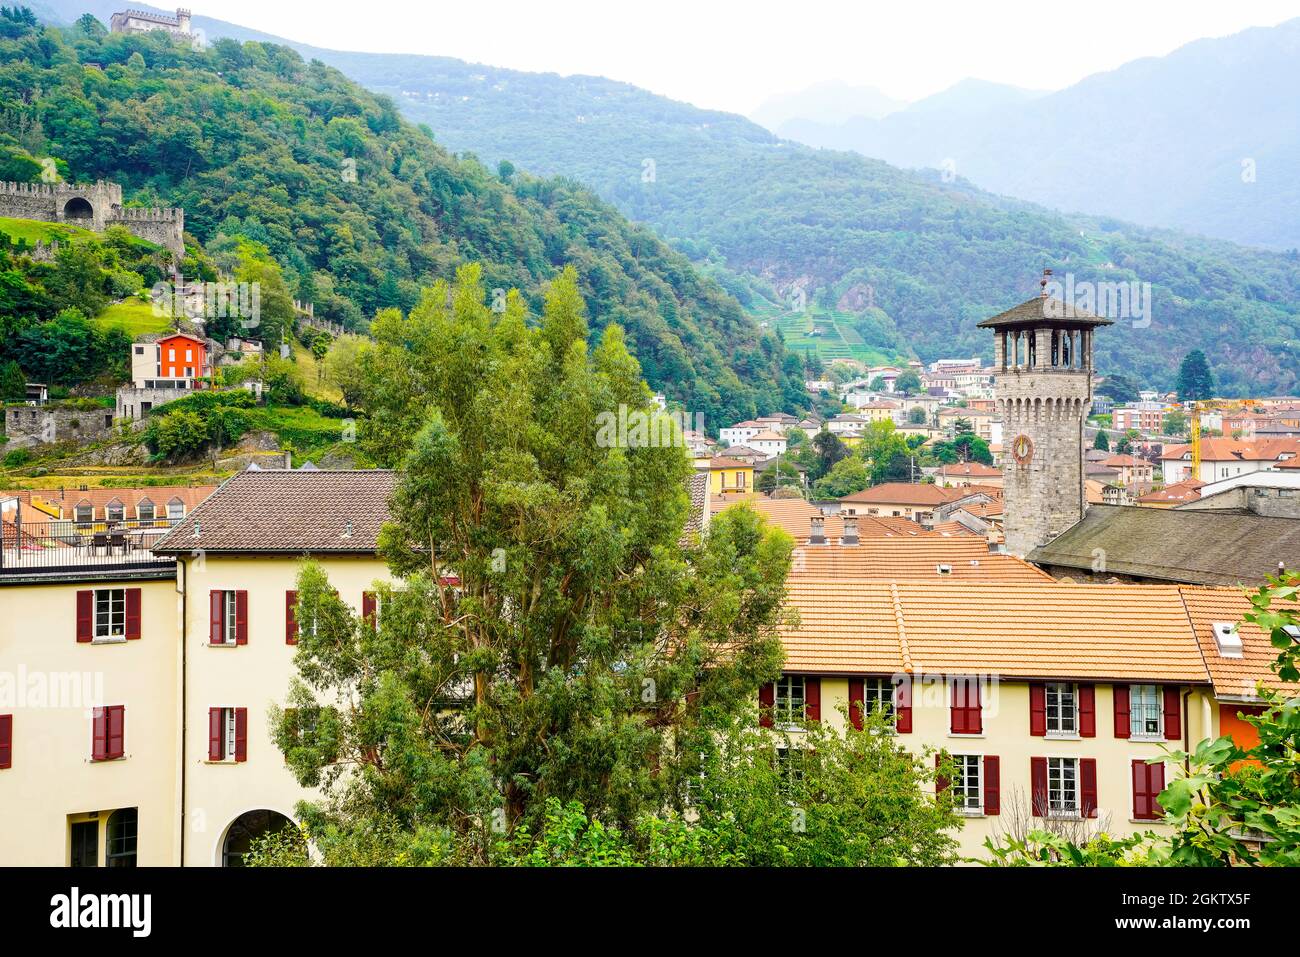 Elevated view of Old Town Bellinzona and Palazzo Civico. Bellinzona is a municipality, a historic Swiss town and the capital of the canton of Ticino i Stock Photo